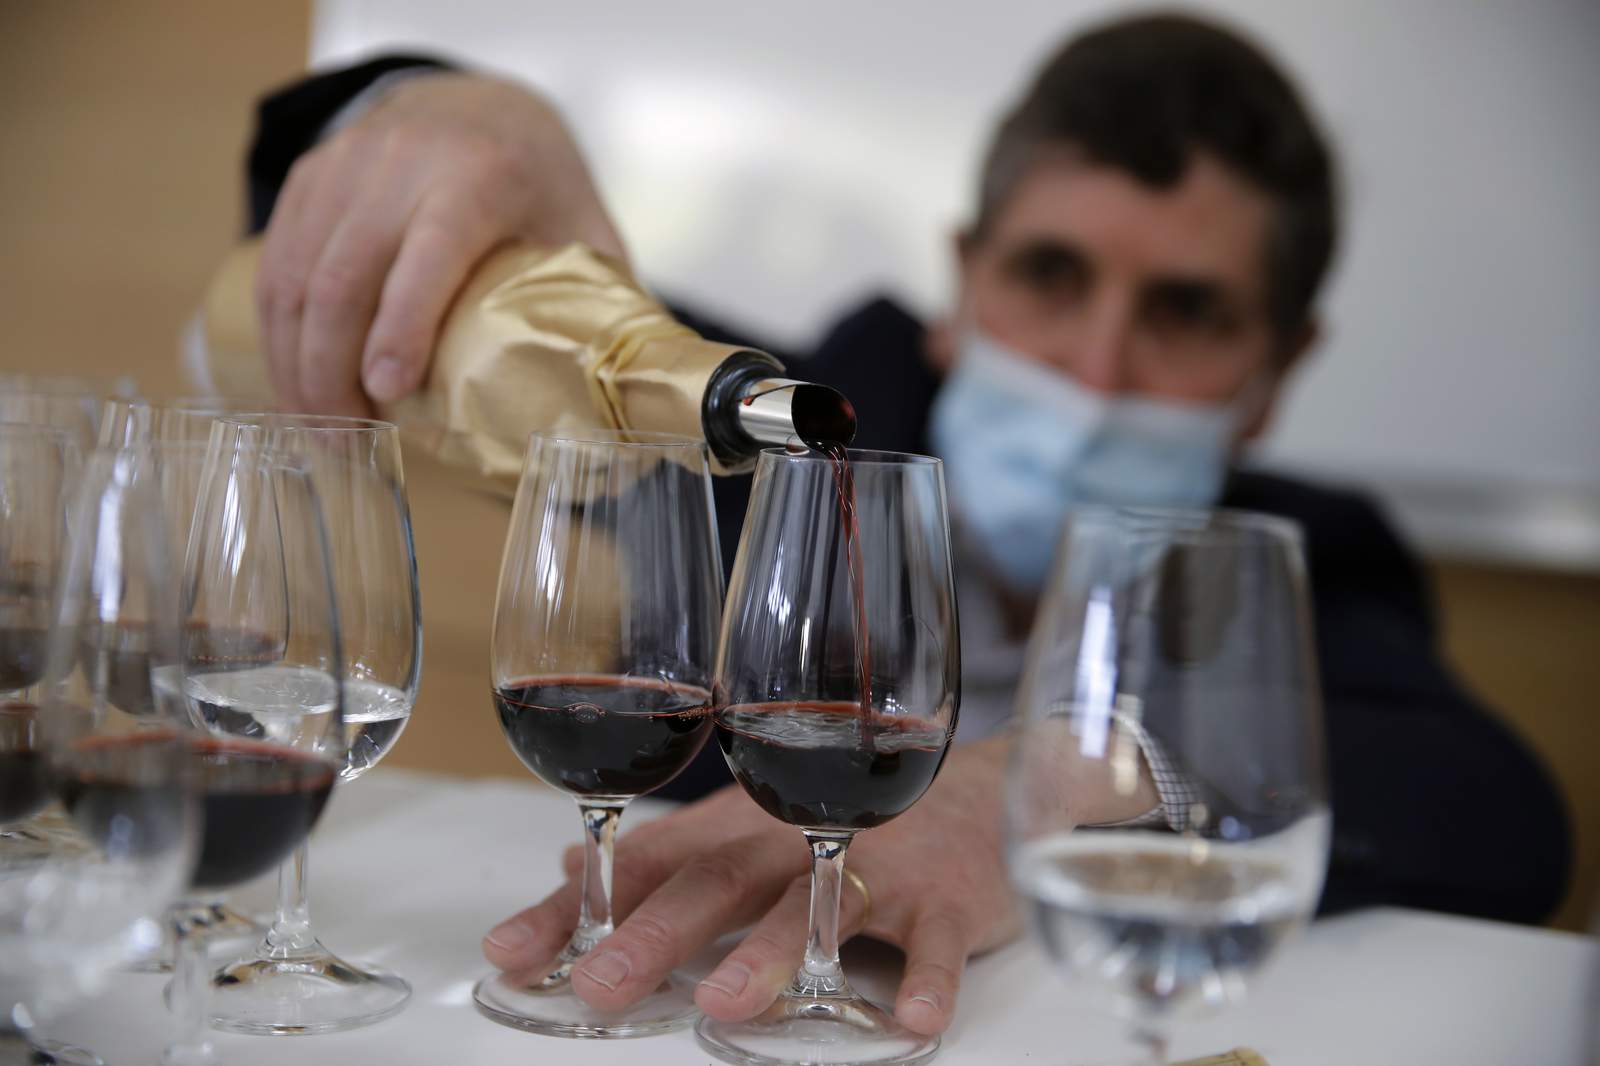 Out of this world: Tasters savor fine wine that spent year in space